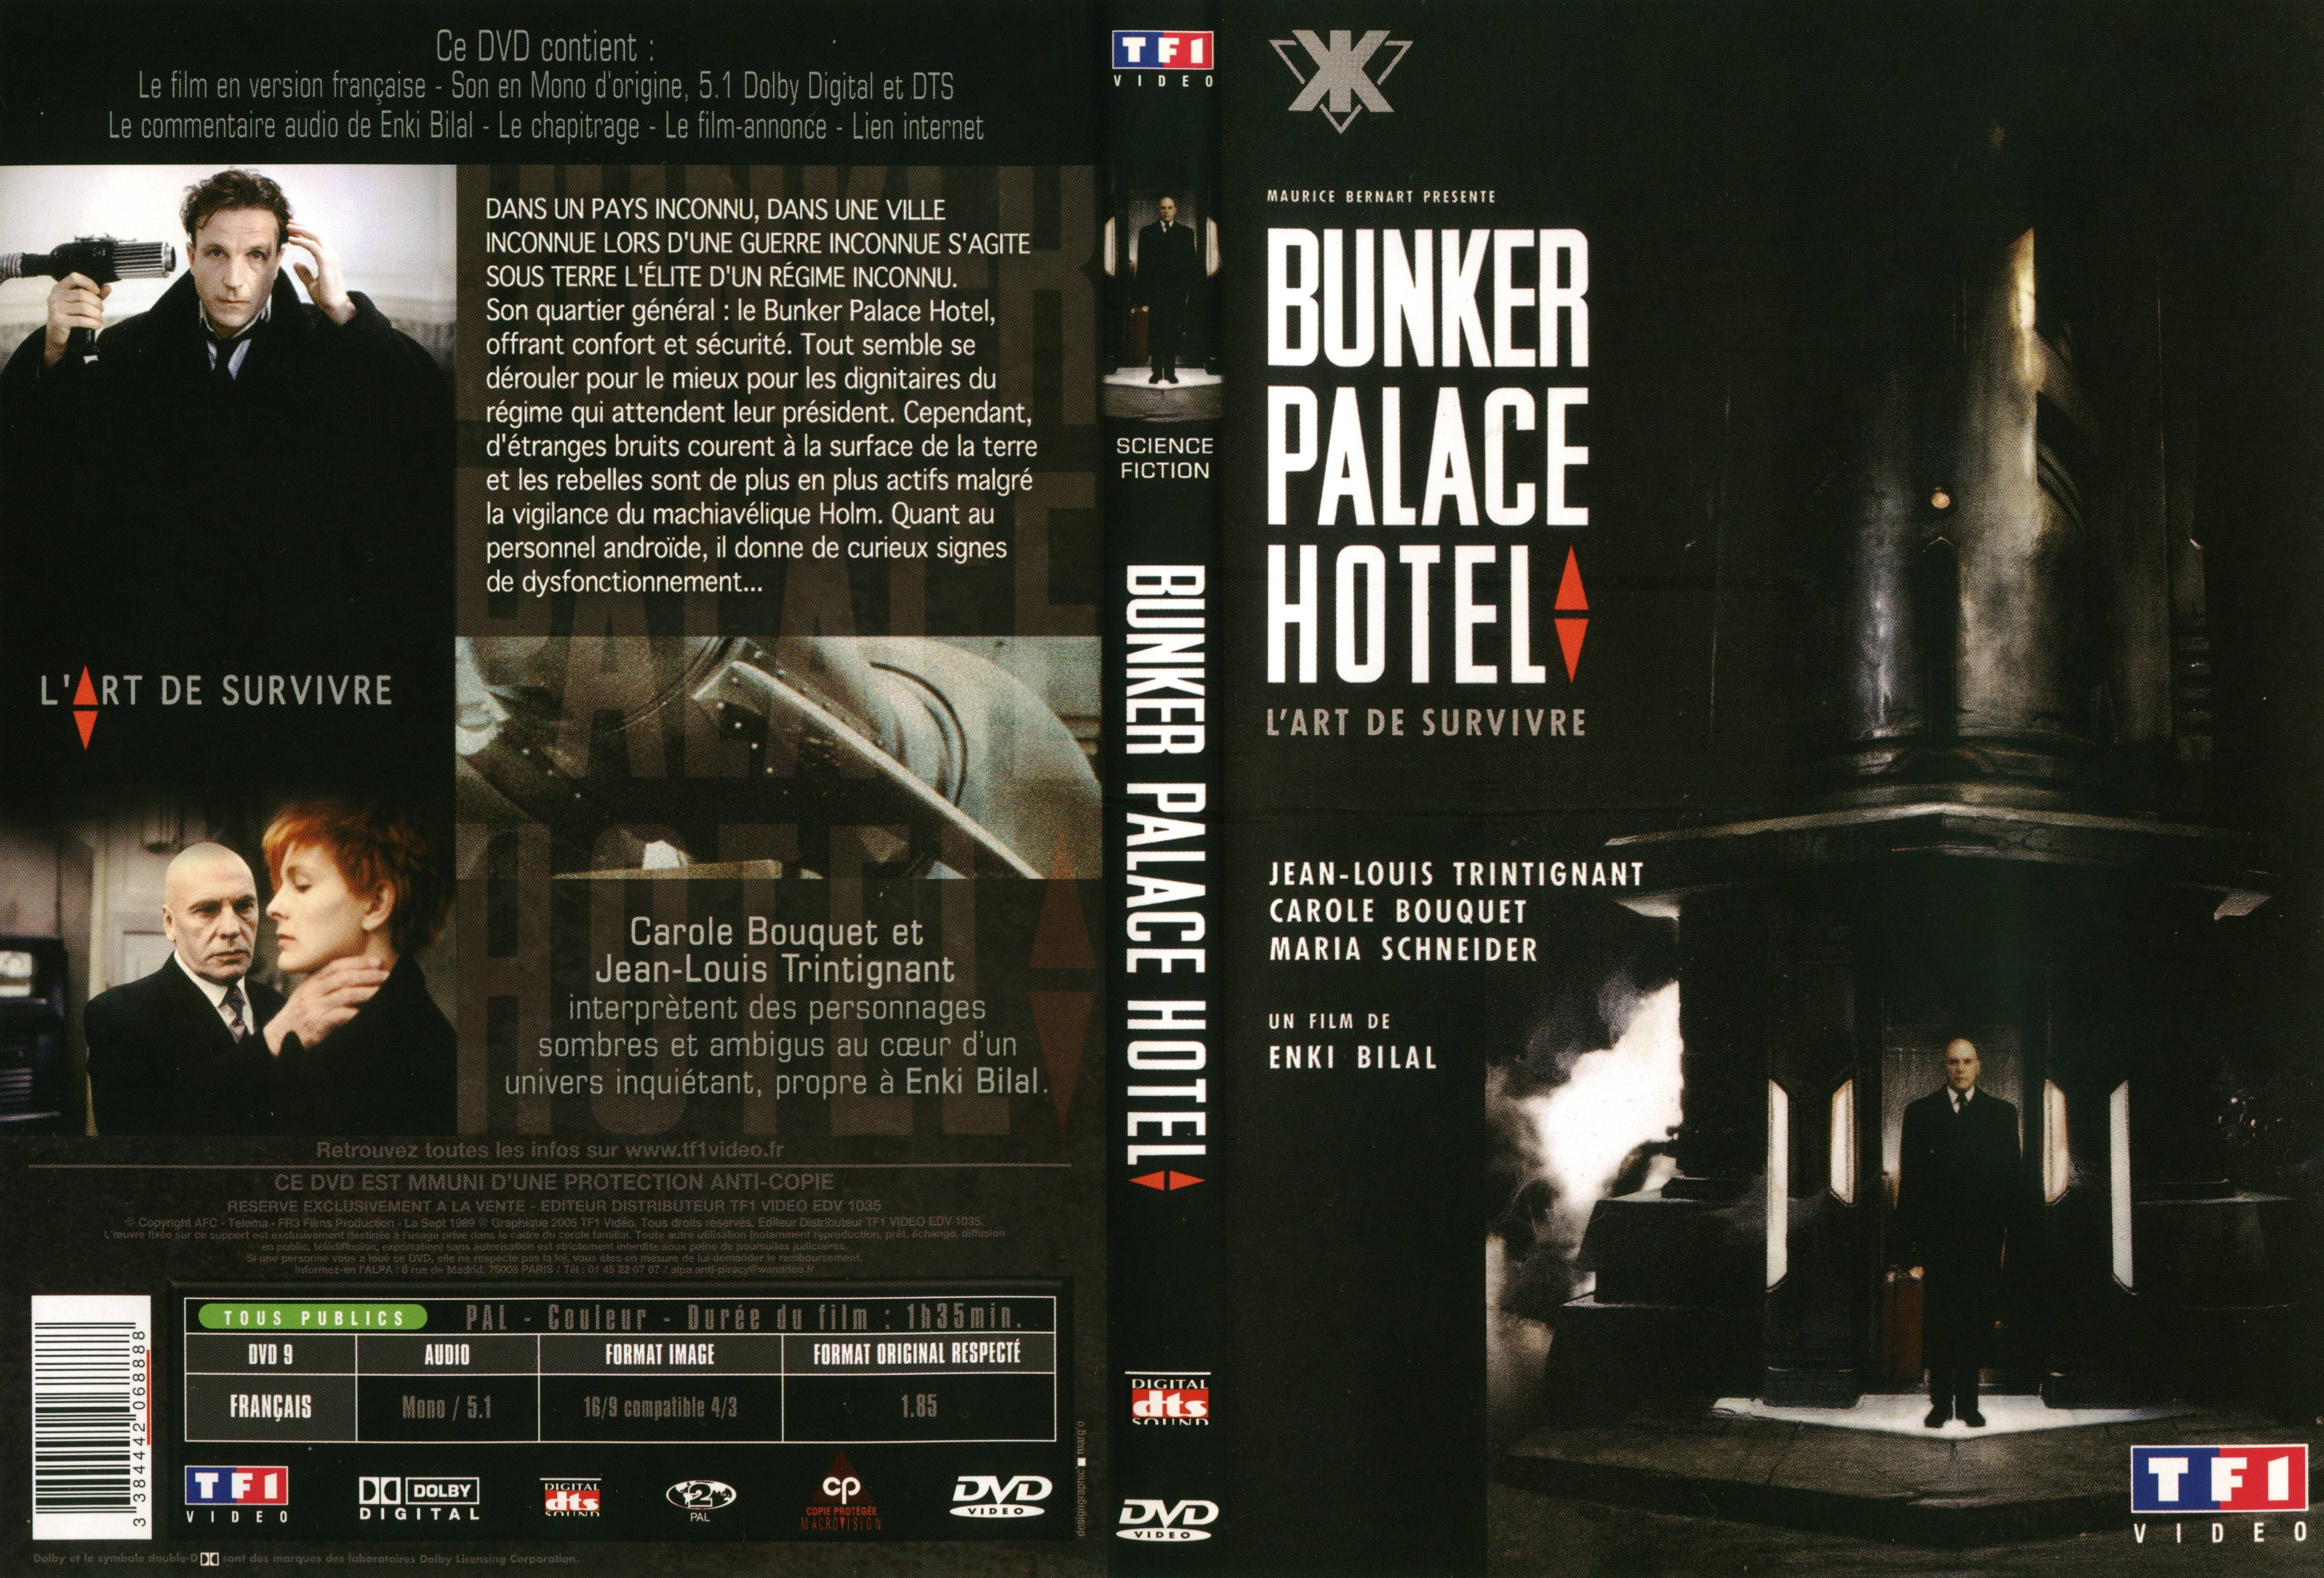 Jaquette DVD Bunker palace hotel